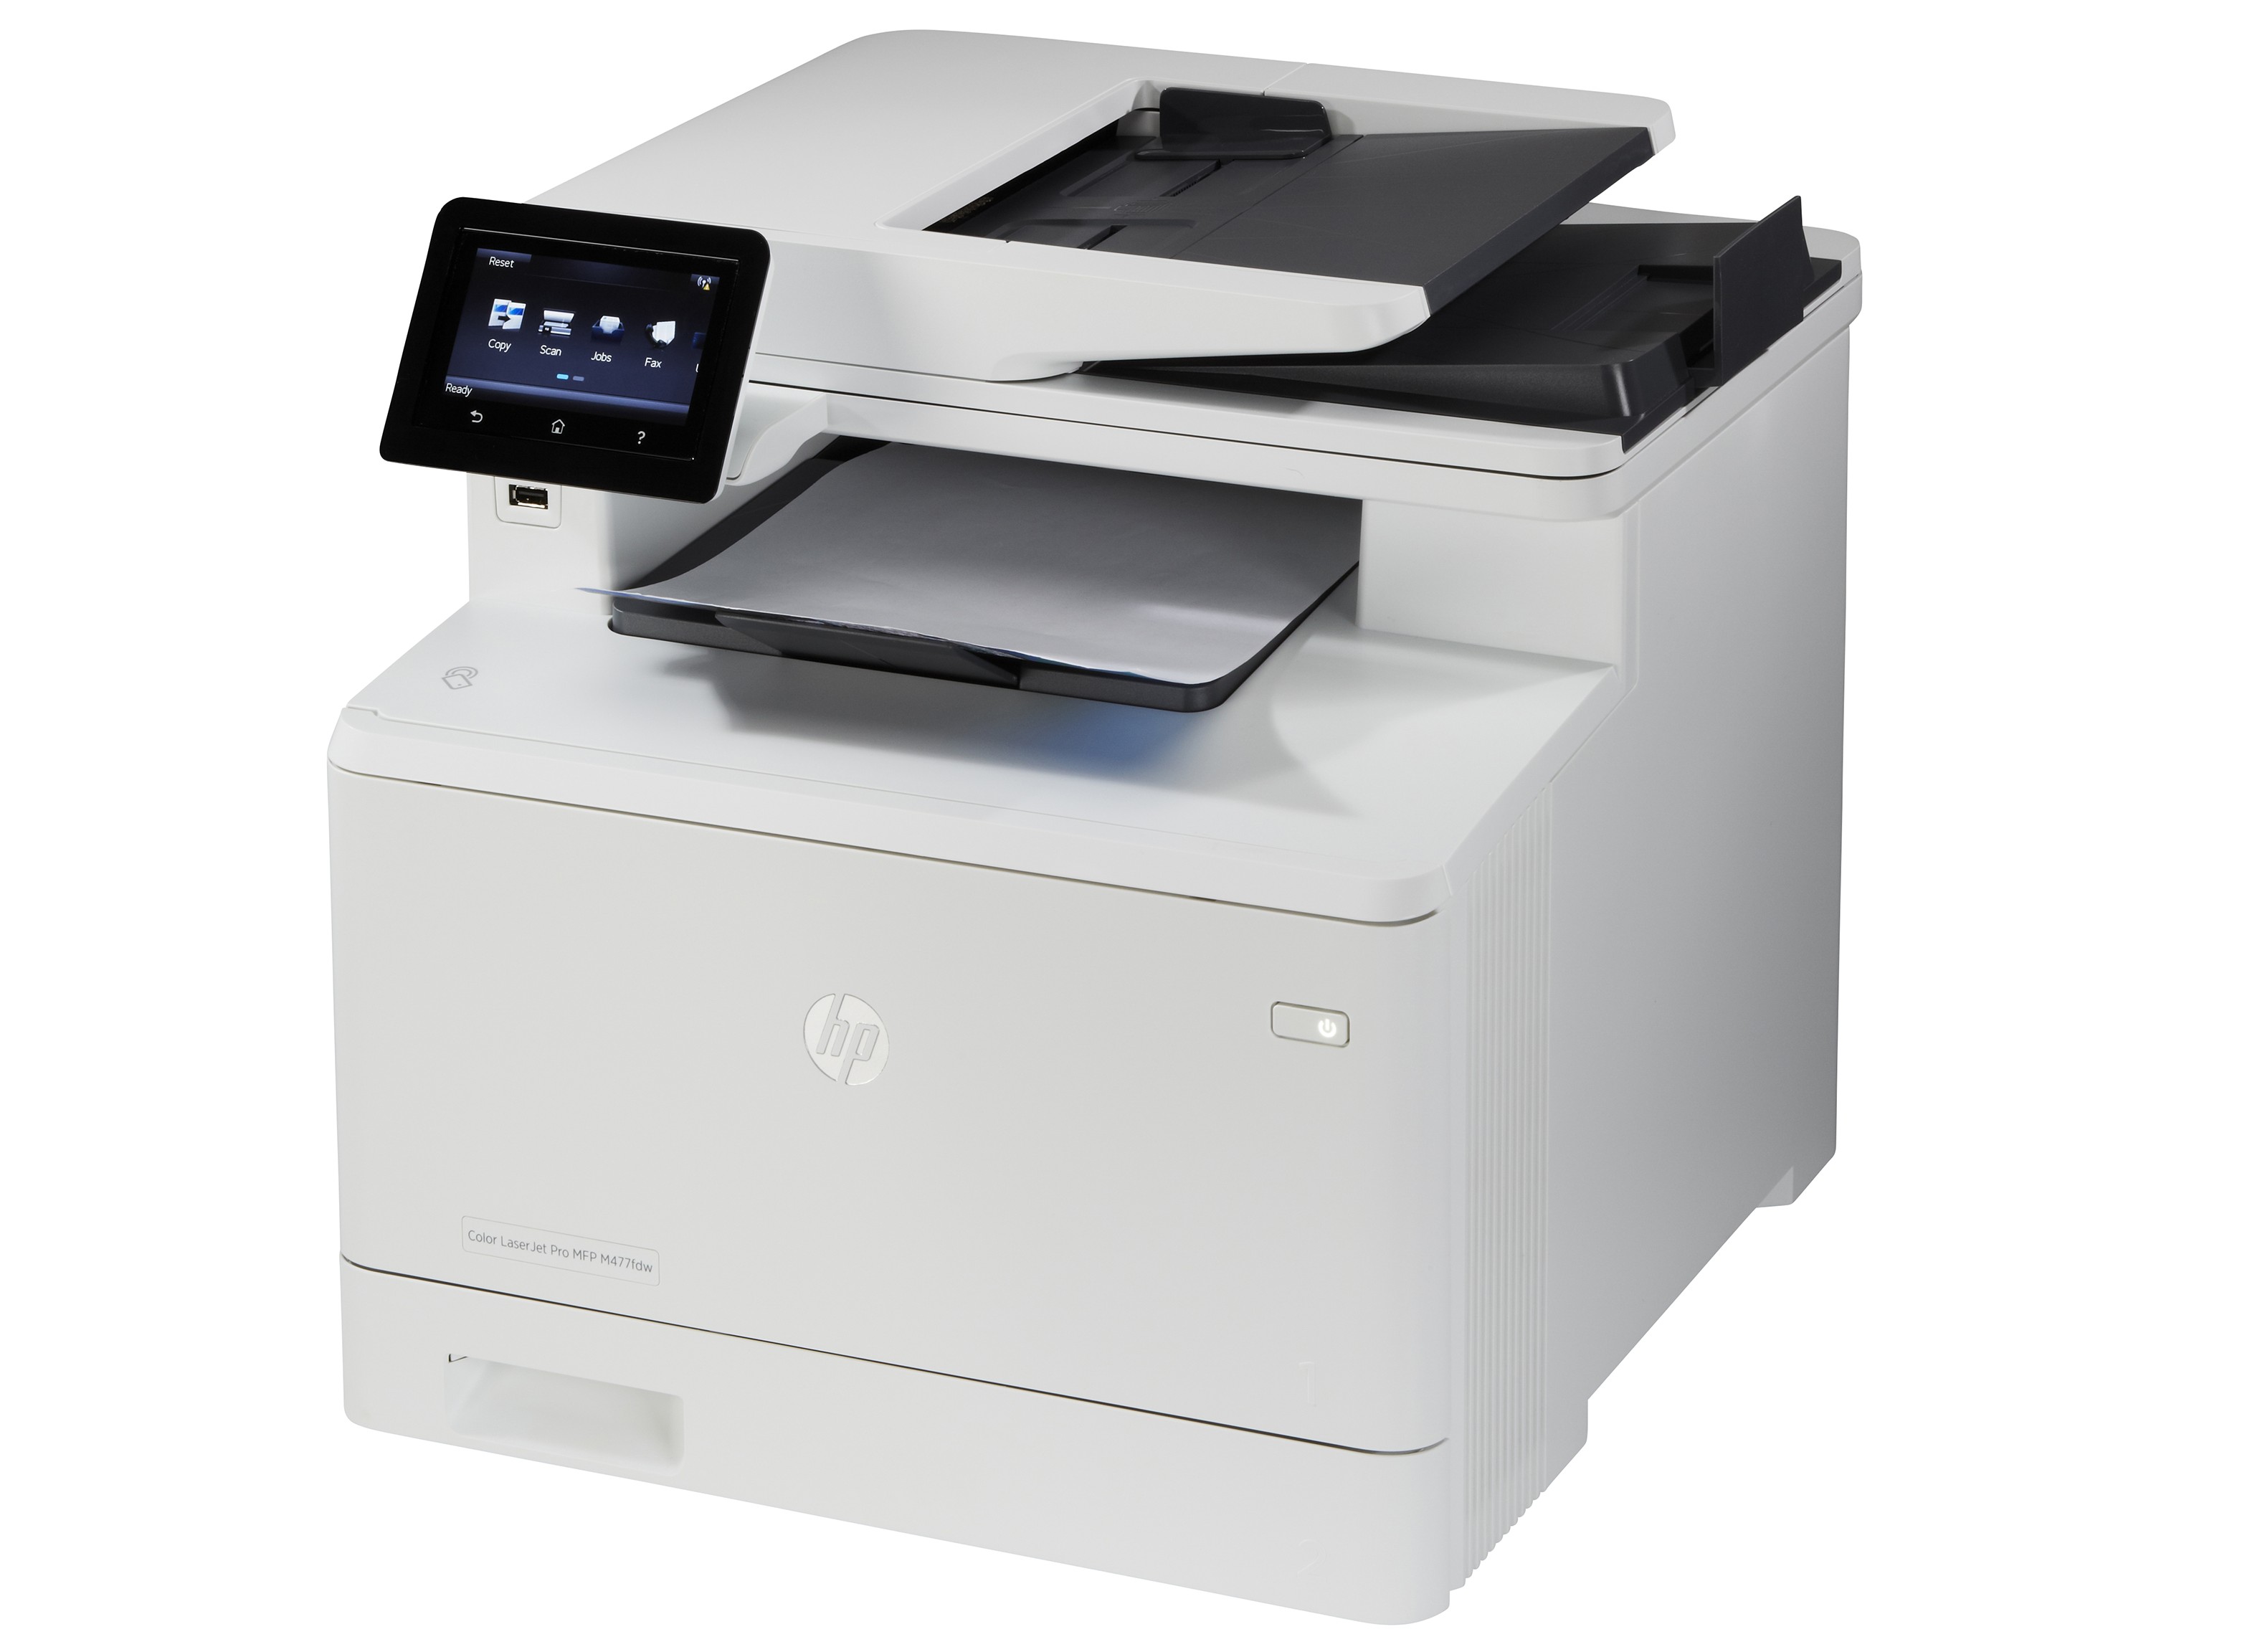 anmodning Barry Hotel HP Color LaserJet Pro M477FDW Printer Review - Consumer Reports